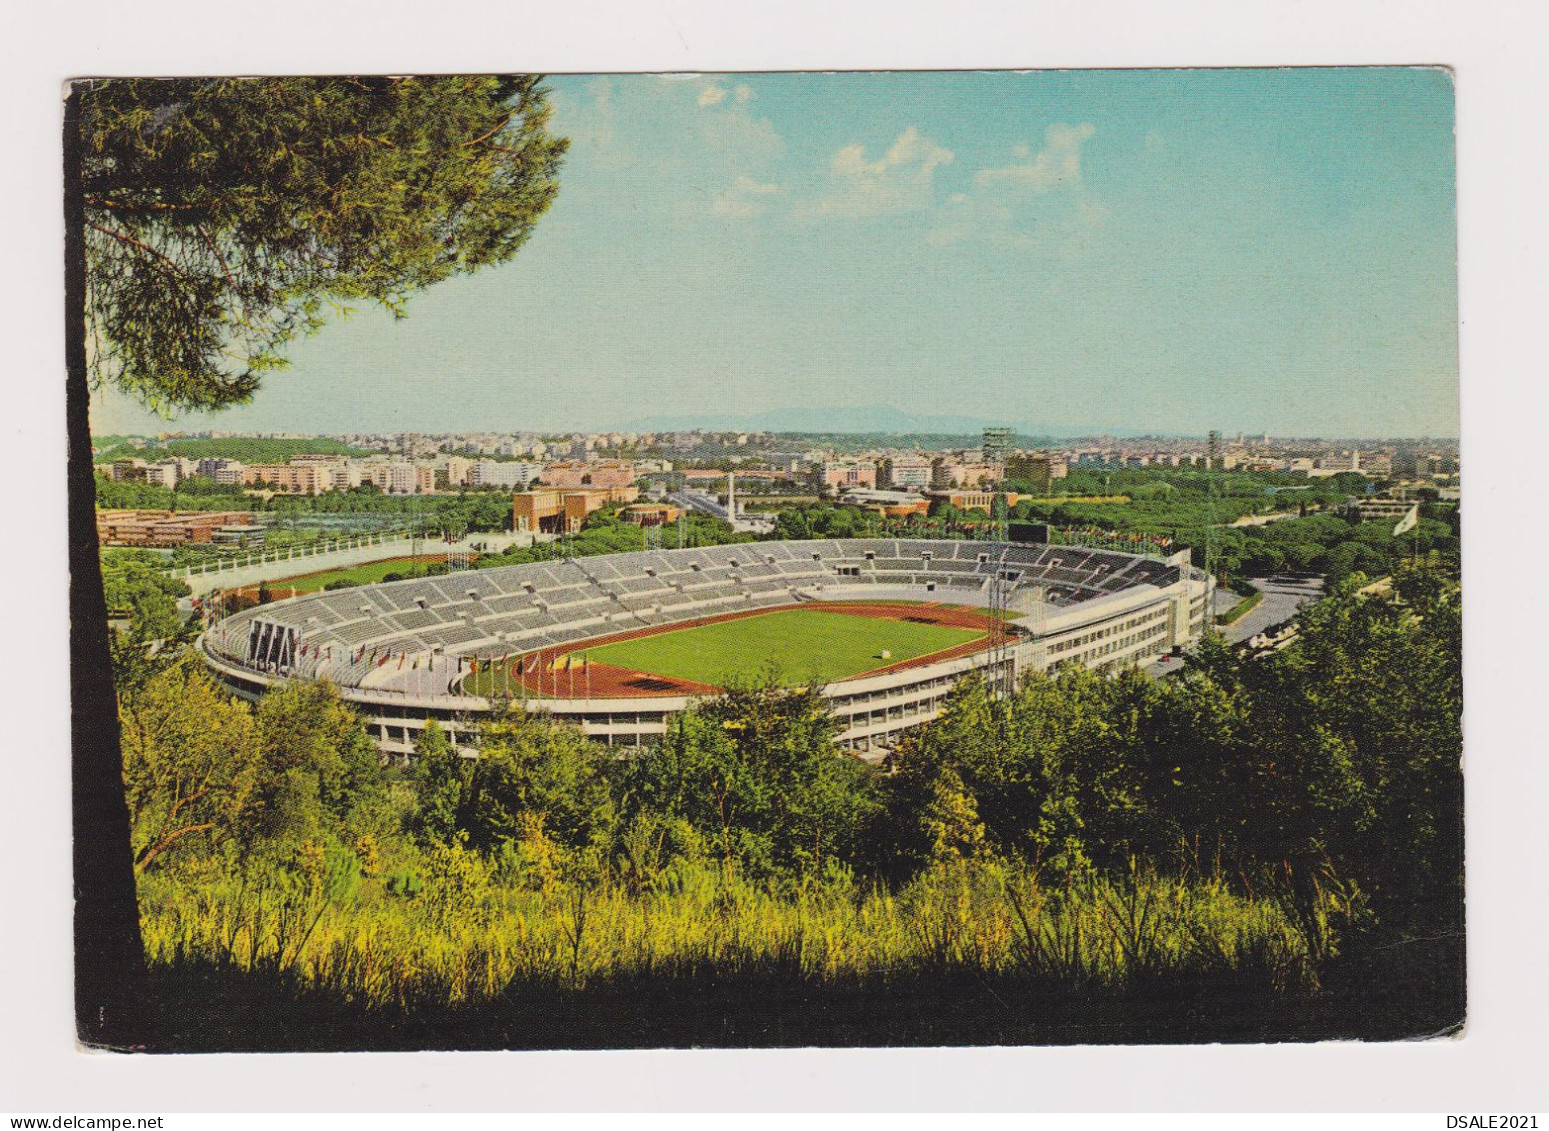 Italy ROMA Olympic Stadium General View, Soccer Football, Vintage 1960s Photo Postcard RPPc AK (1334) - Stadions